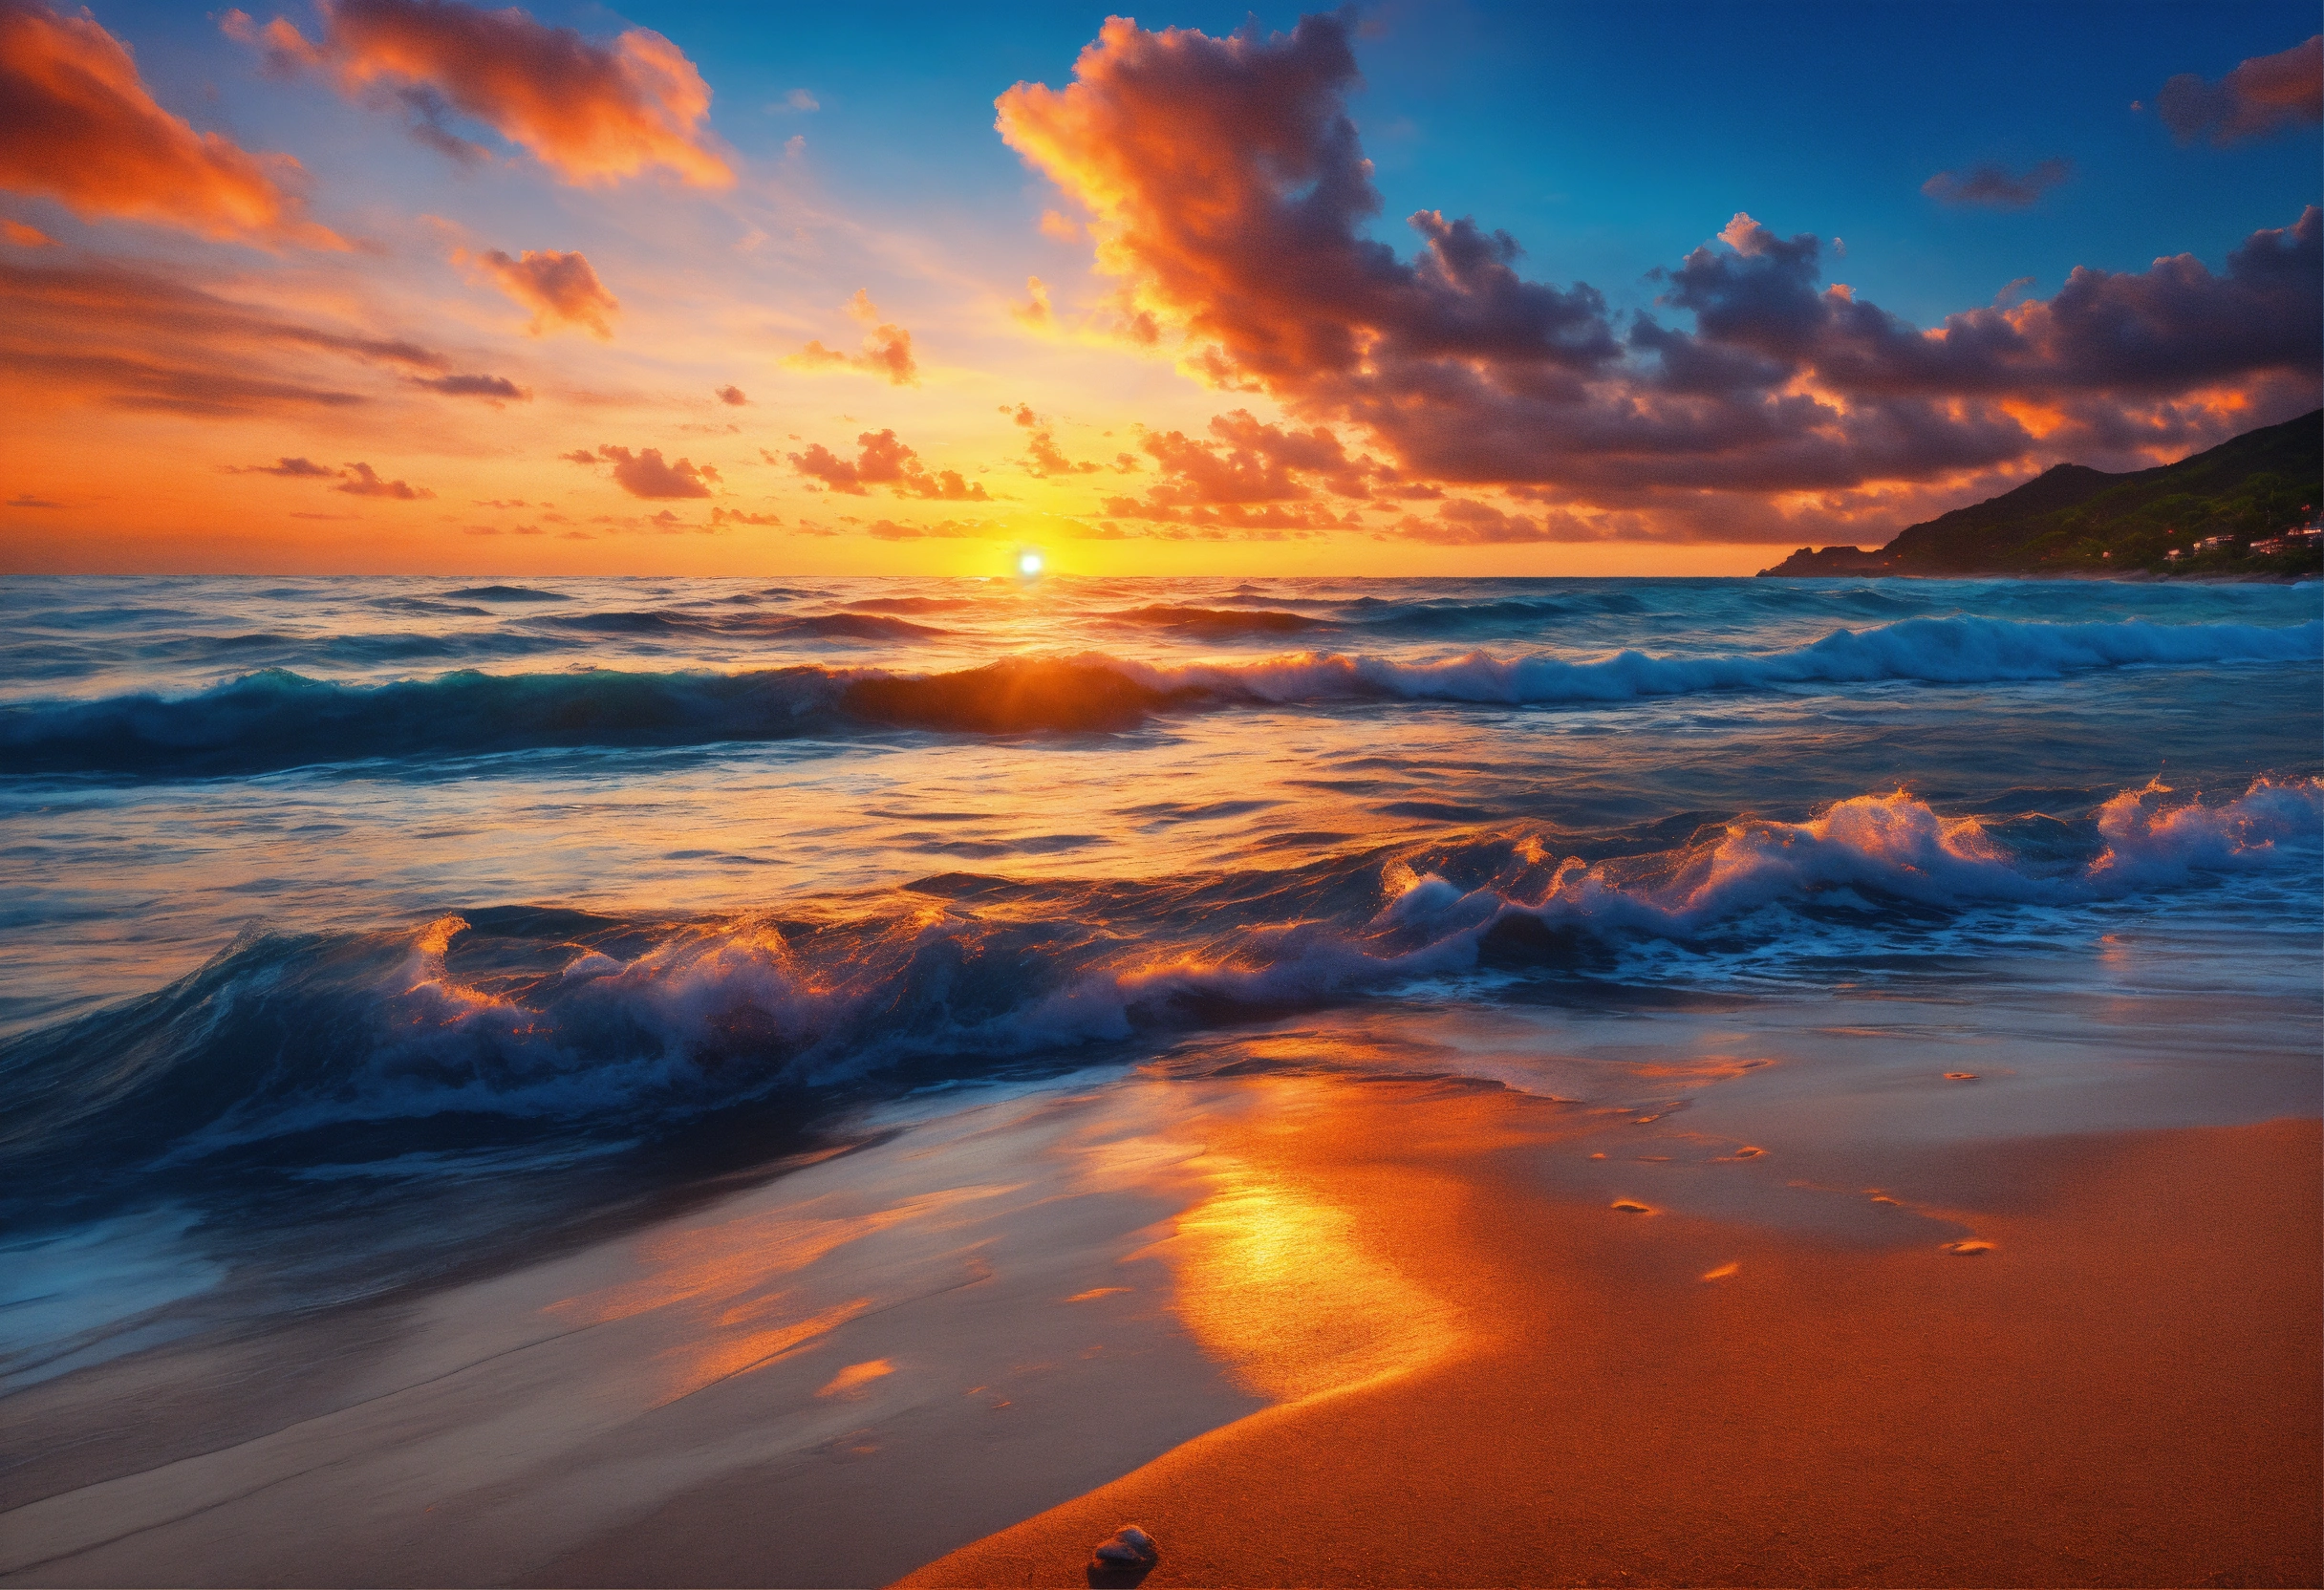 Lexica - The most beautiful beach sunset photo-realistic